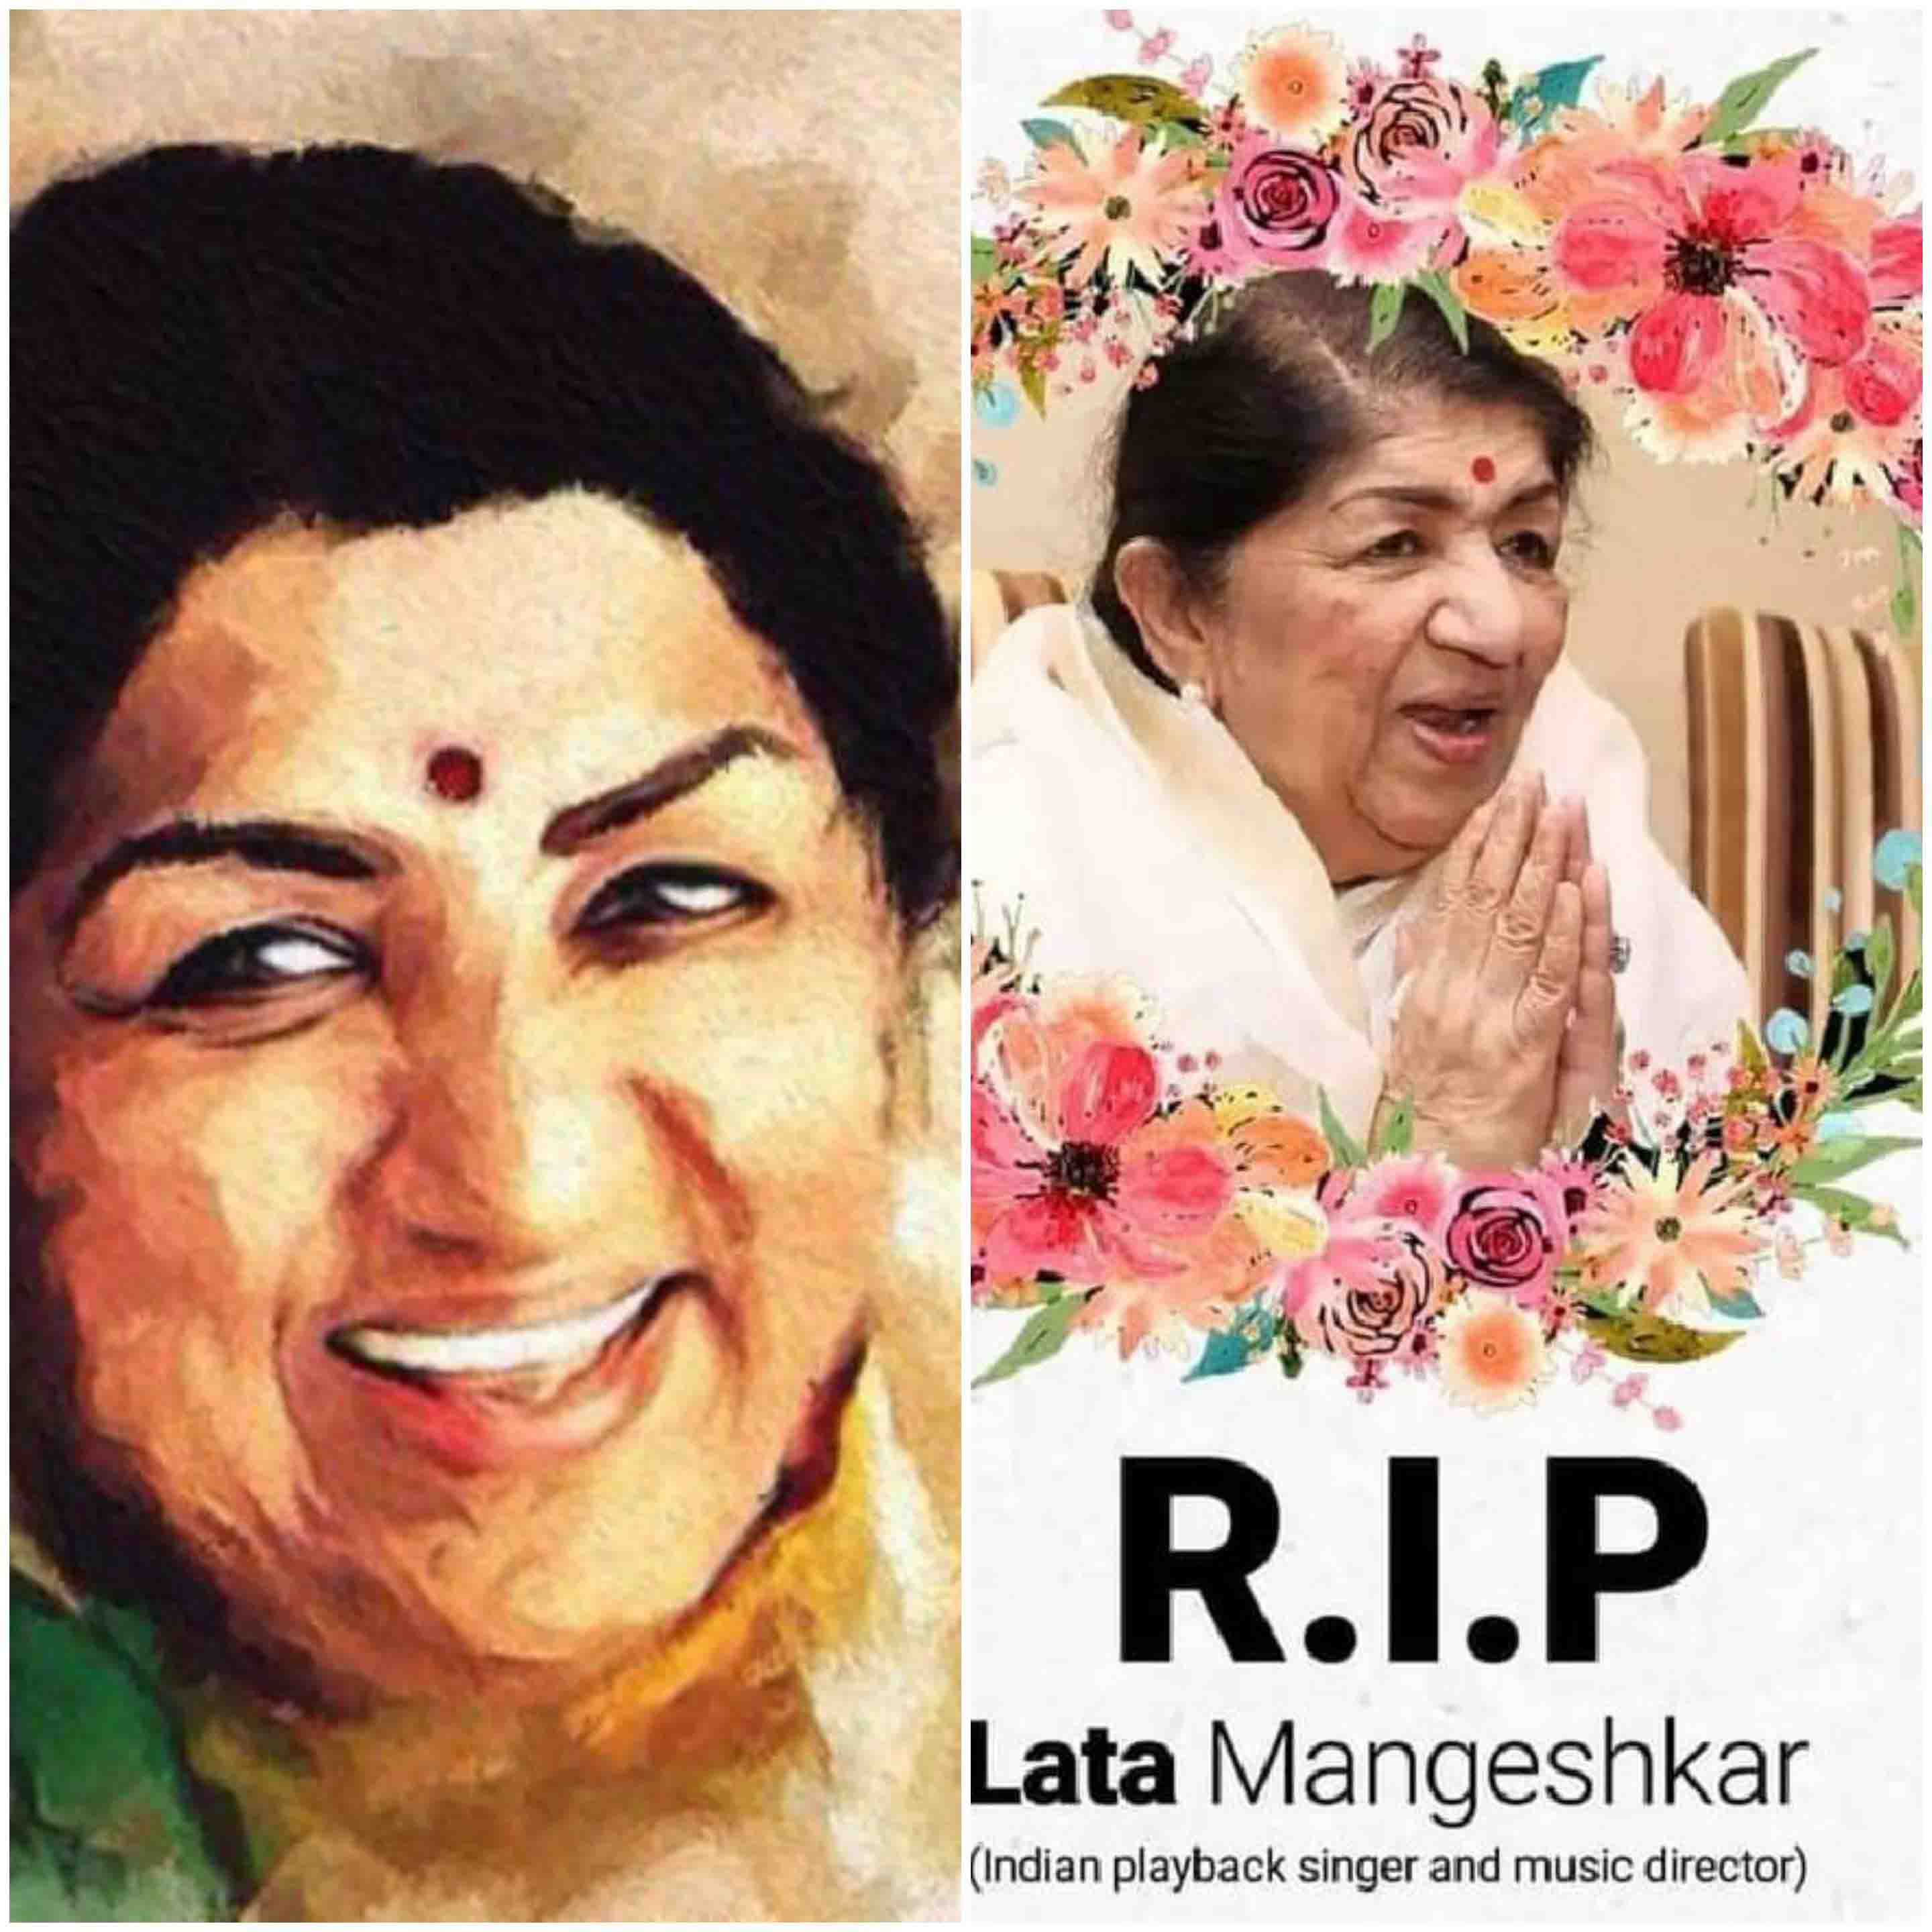 Nation Mourns the Demise of Melody Queen Lata Mangeshkar - HimbuMail